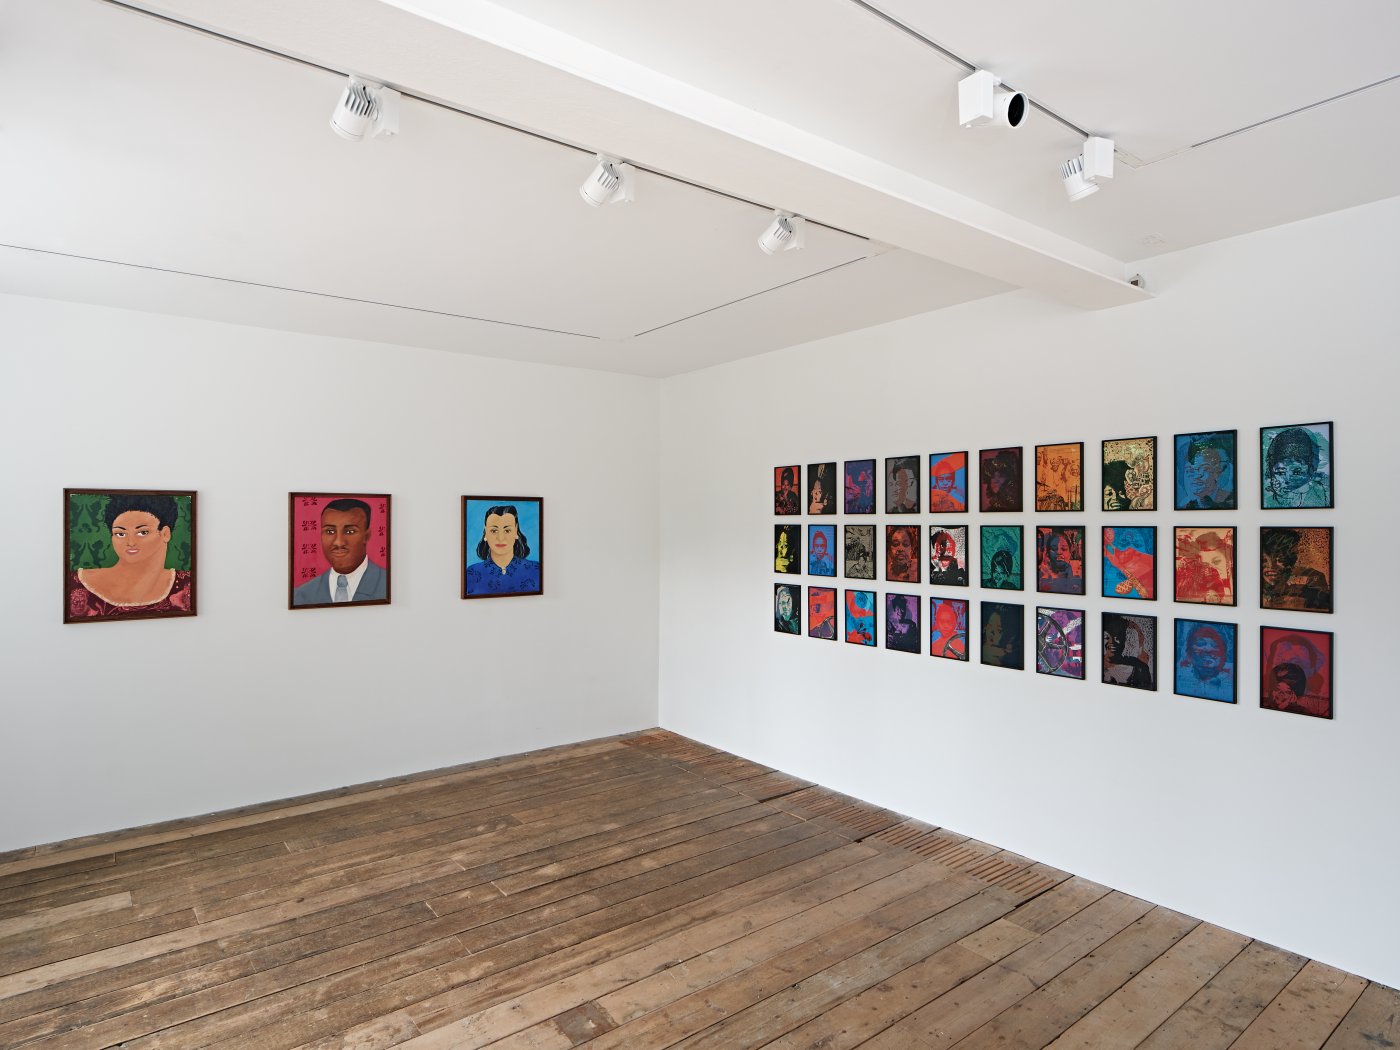 Installation image for Rita Keegan: Somewhere Between There and Here, at South London Gallery